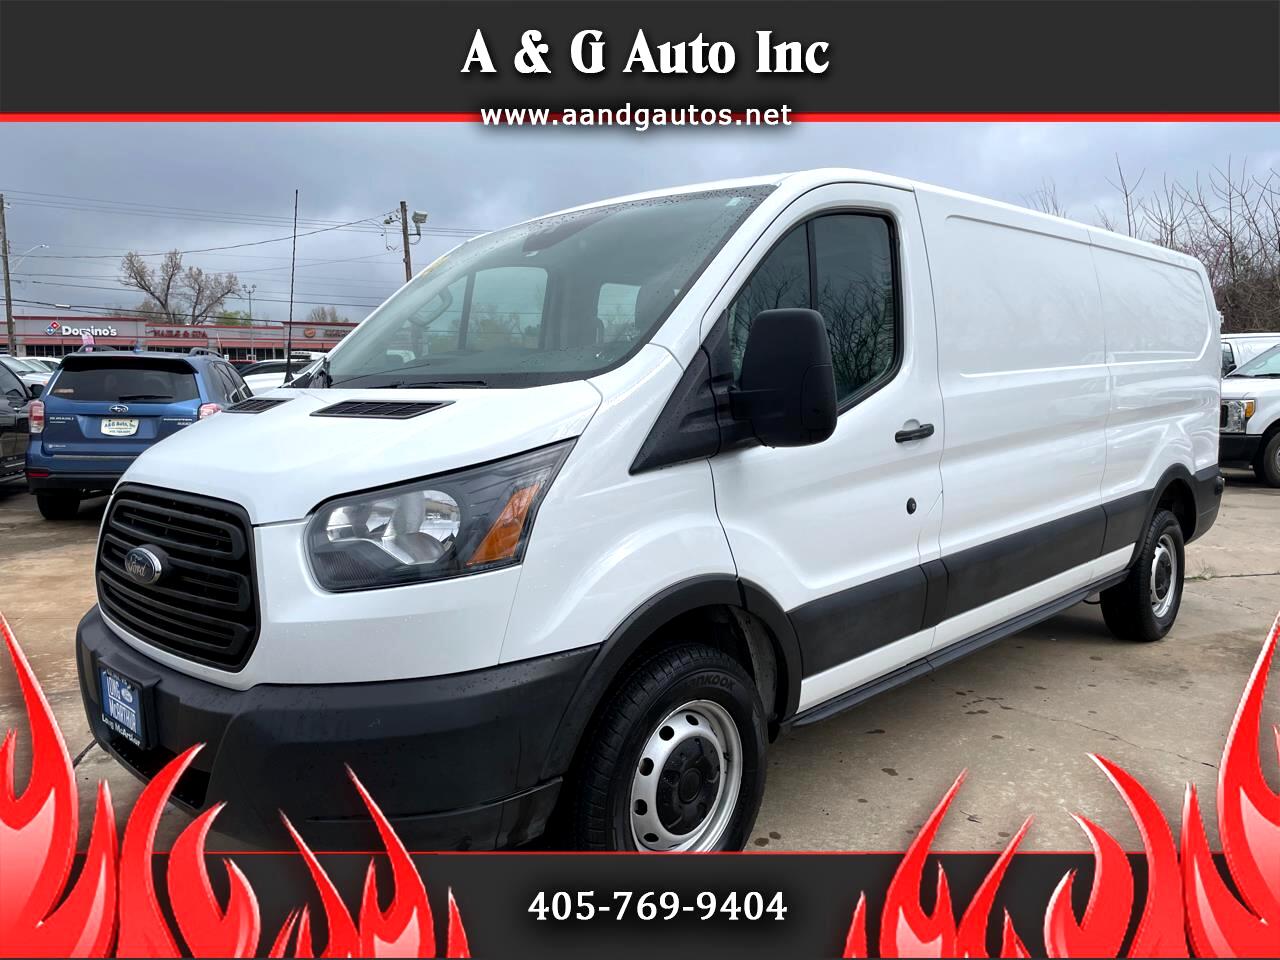 2019 Ford Transit for sale in Oklahoma City OK 73141 by A & G Auto Inc